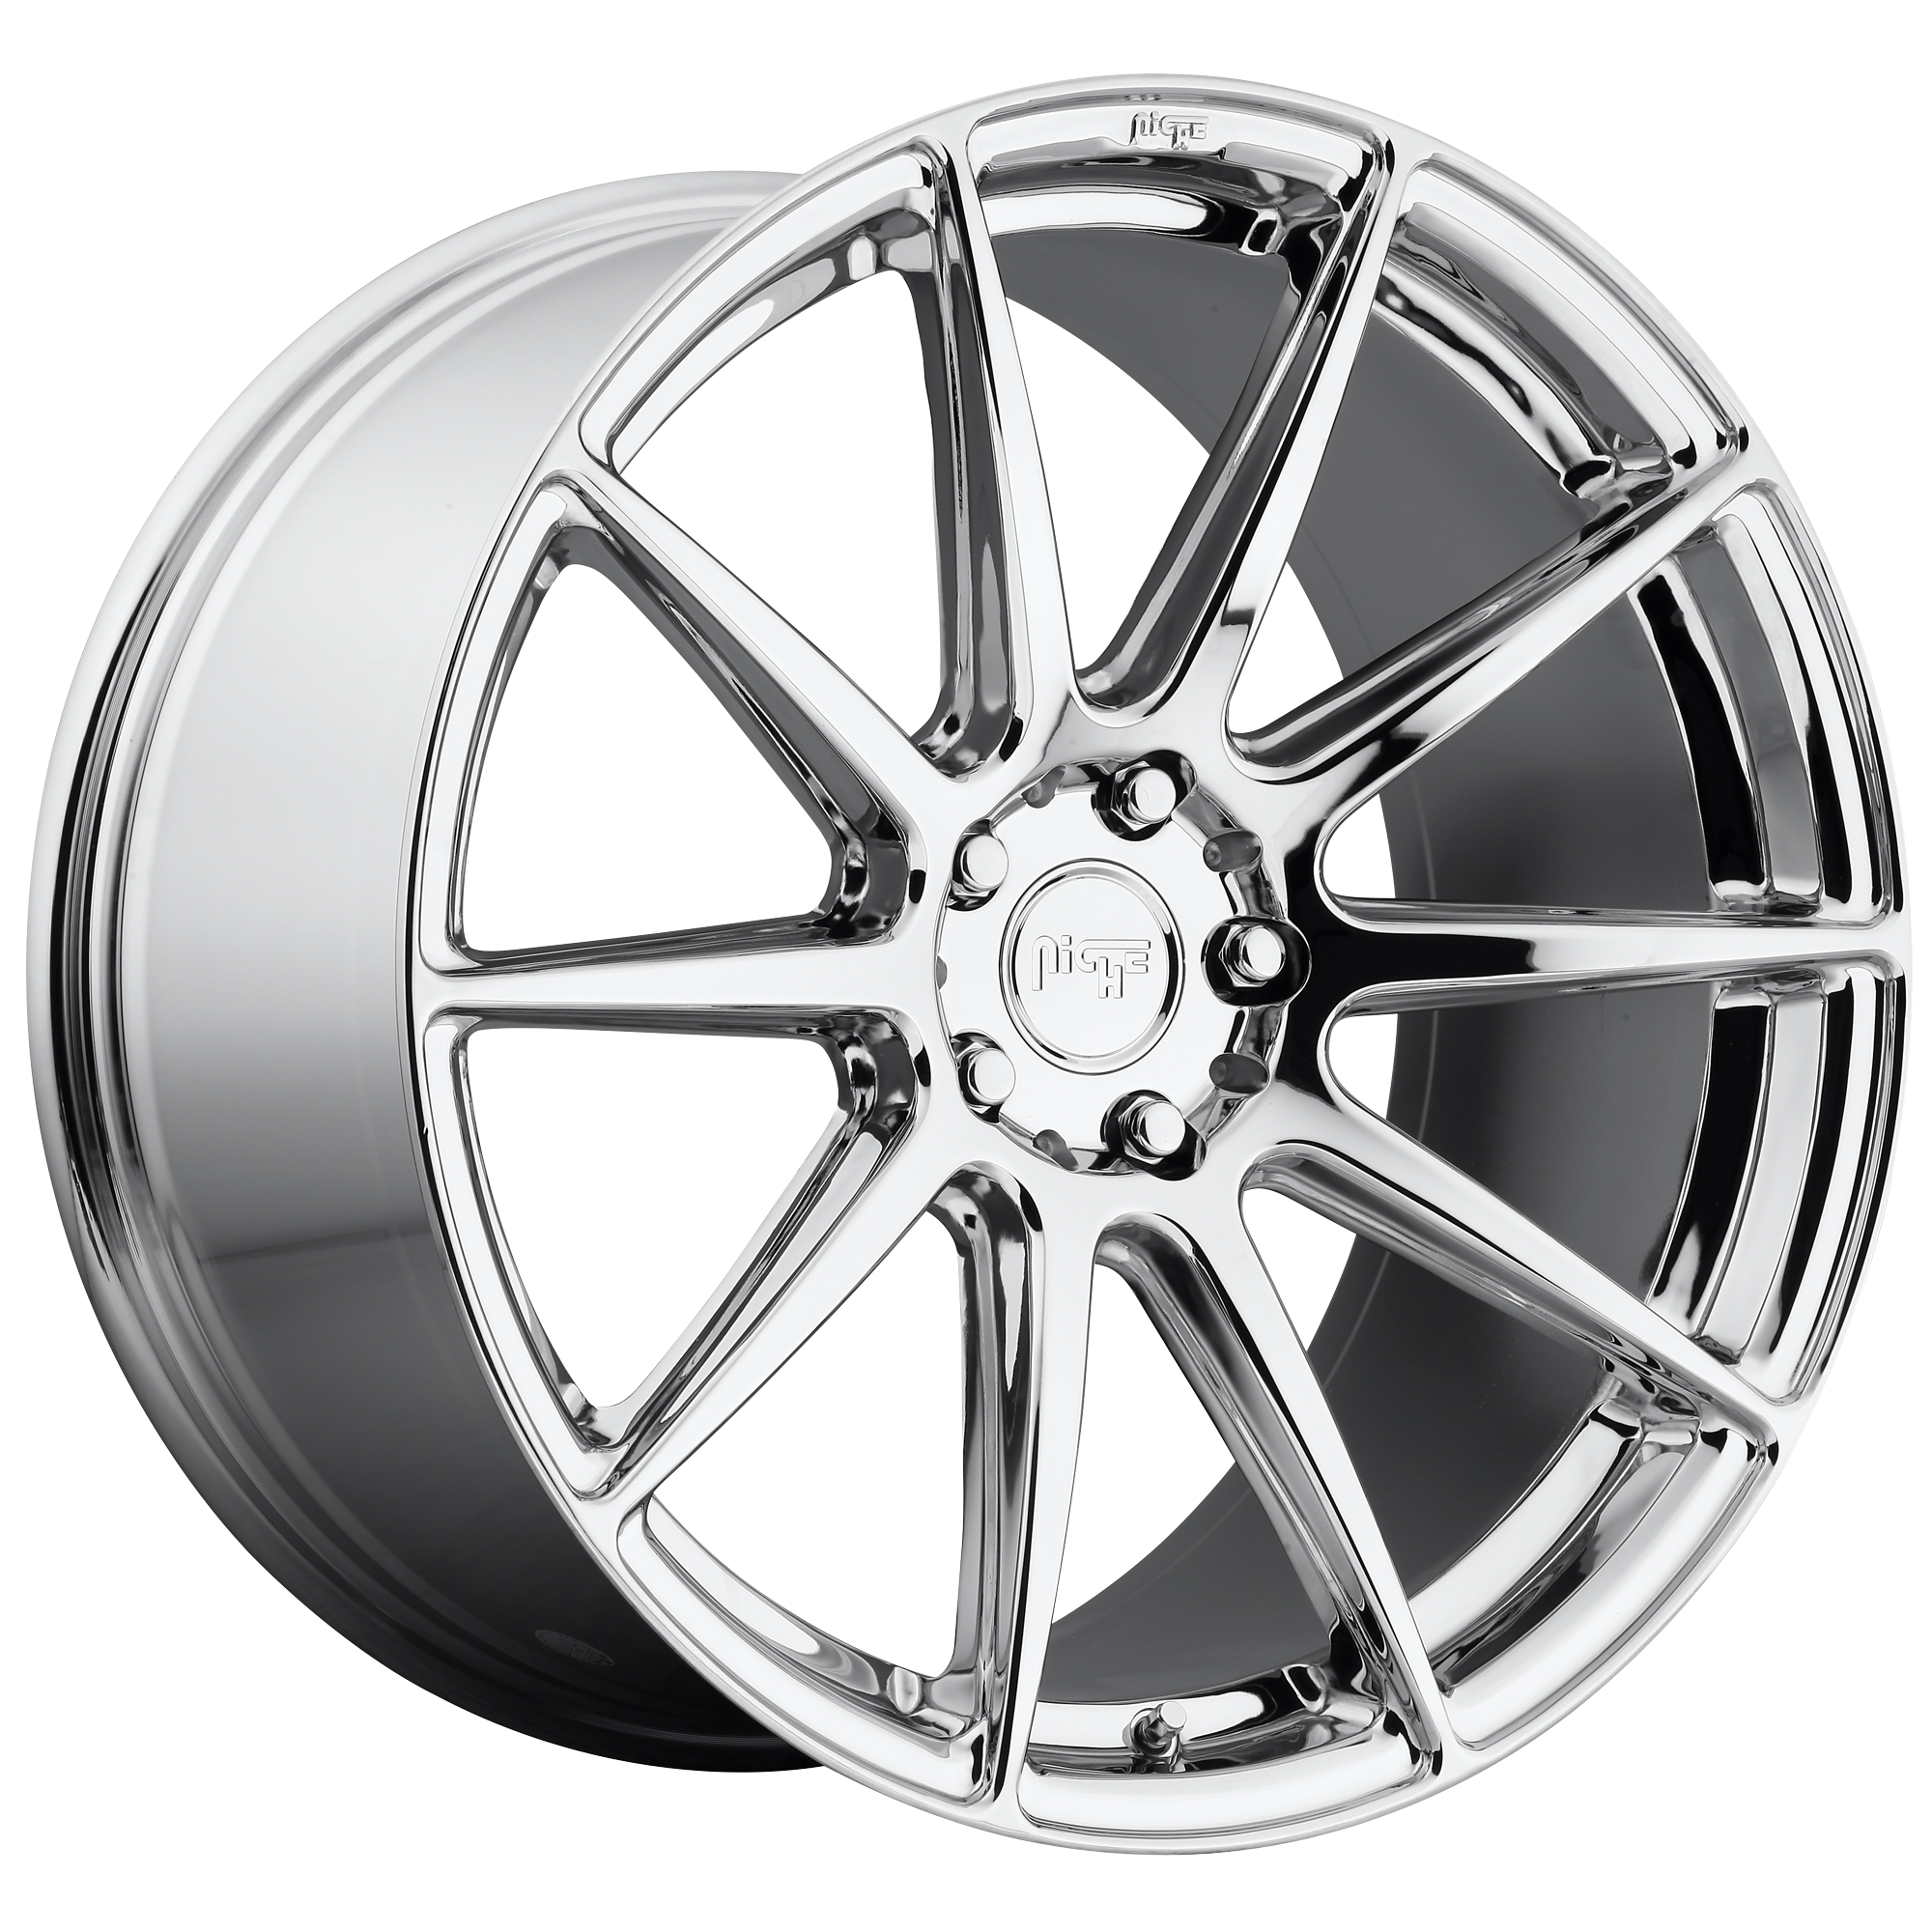 ESSEN 20x9 5x120.00 CHROME PLATED (35 mm) - Tires and Engine Performance